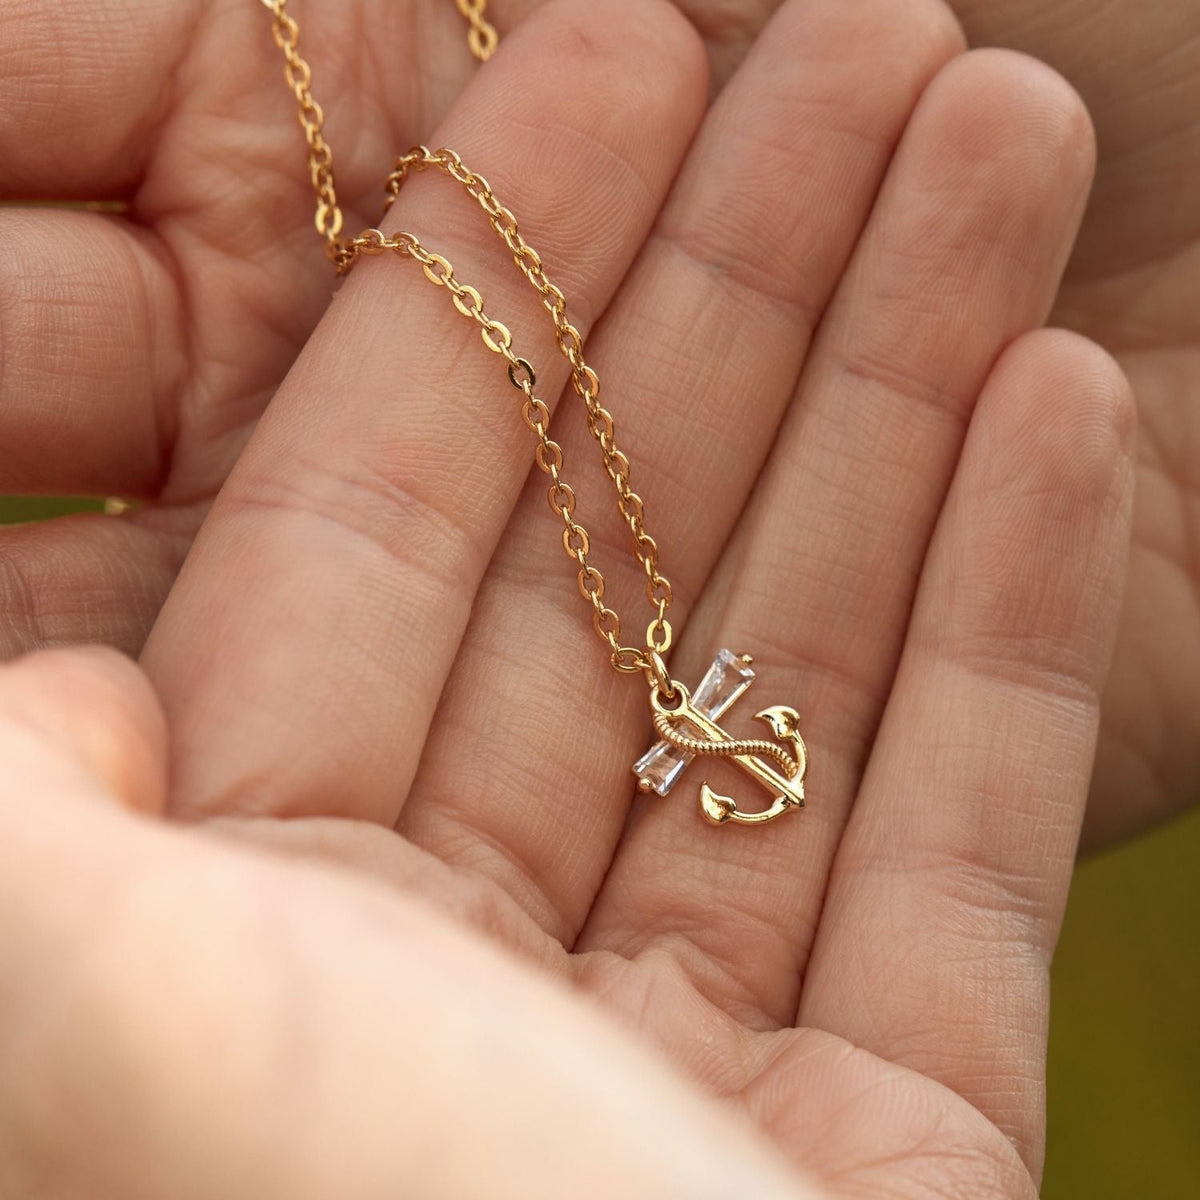 To My Beautiful Mom | The Person That I Am | Anchor Necklace